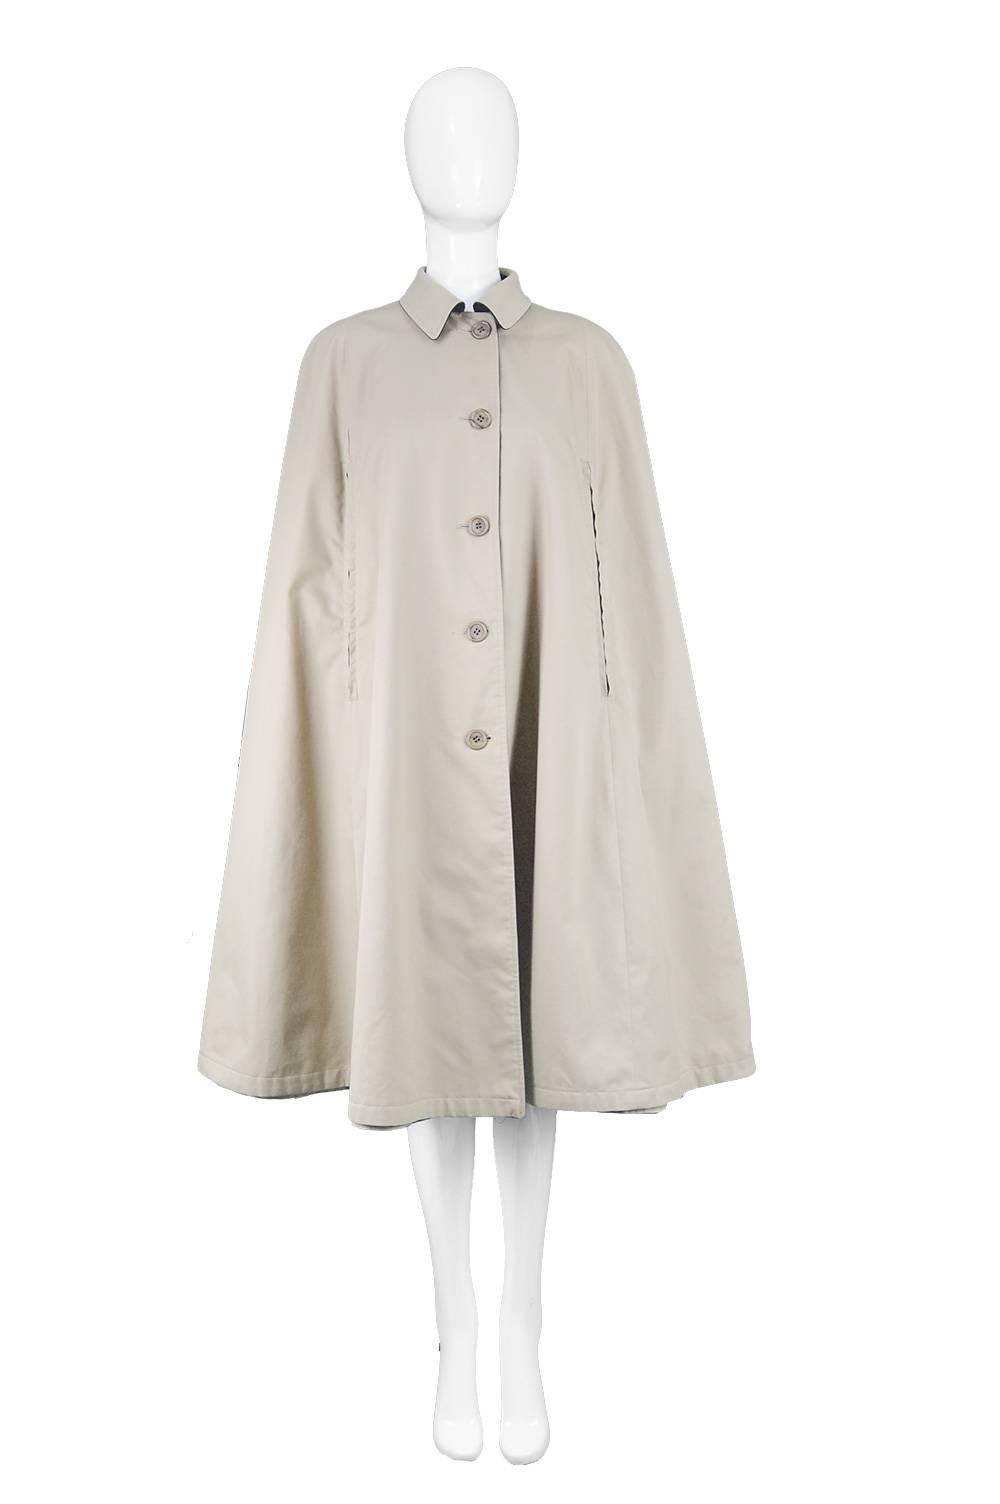 Burberry Vintage 1960s Reversible Trenchcoat Gabardine & Wool Plaid Cloak 

Size: One size fits most.
Bust -Free
Waist - Free
Length (Shoulder to Hem) - 42” / 106cm
Shoulder to Shoulder - 17” / 43cm

Condition: Excellent Vintage Condition - Small